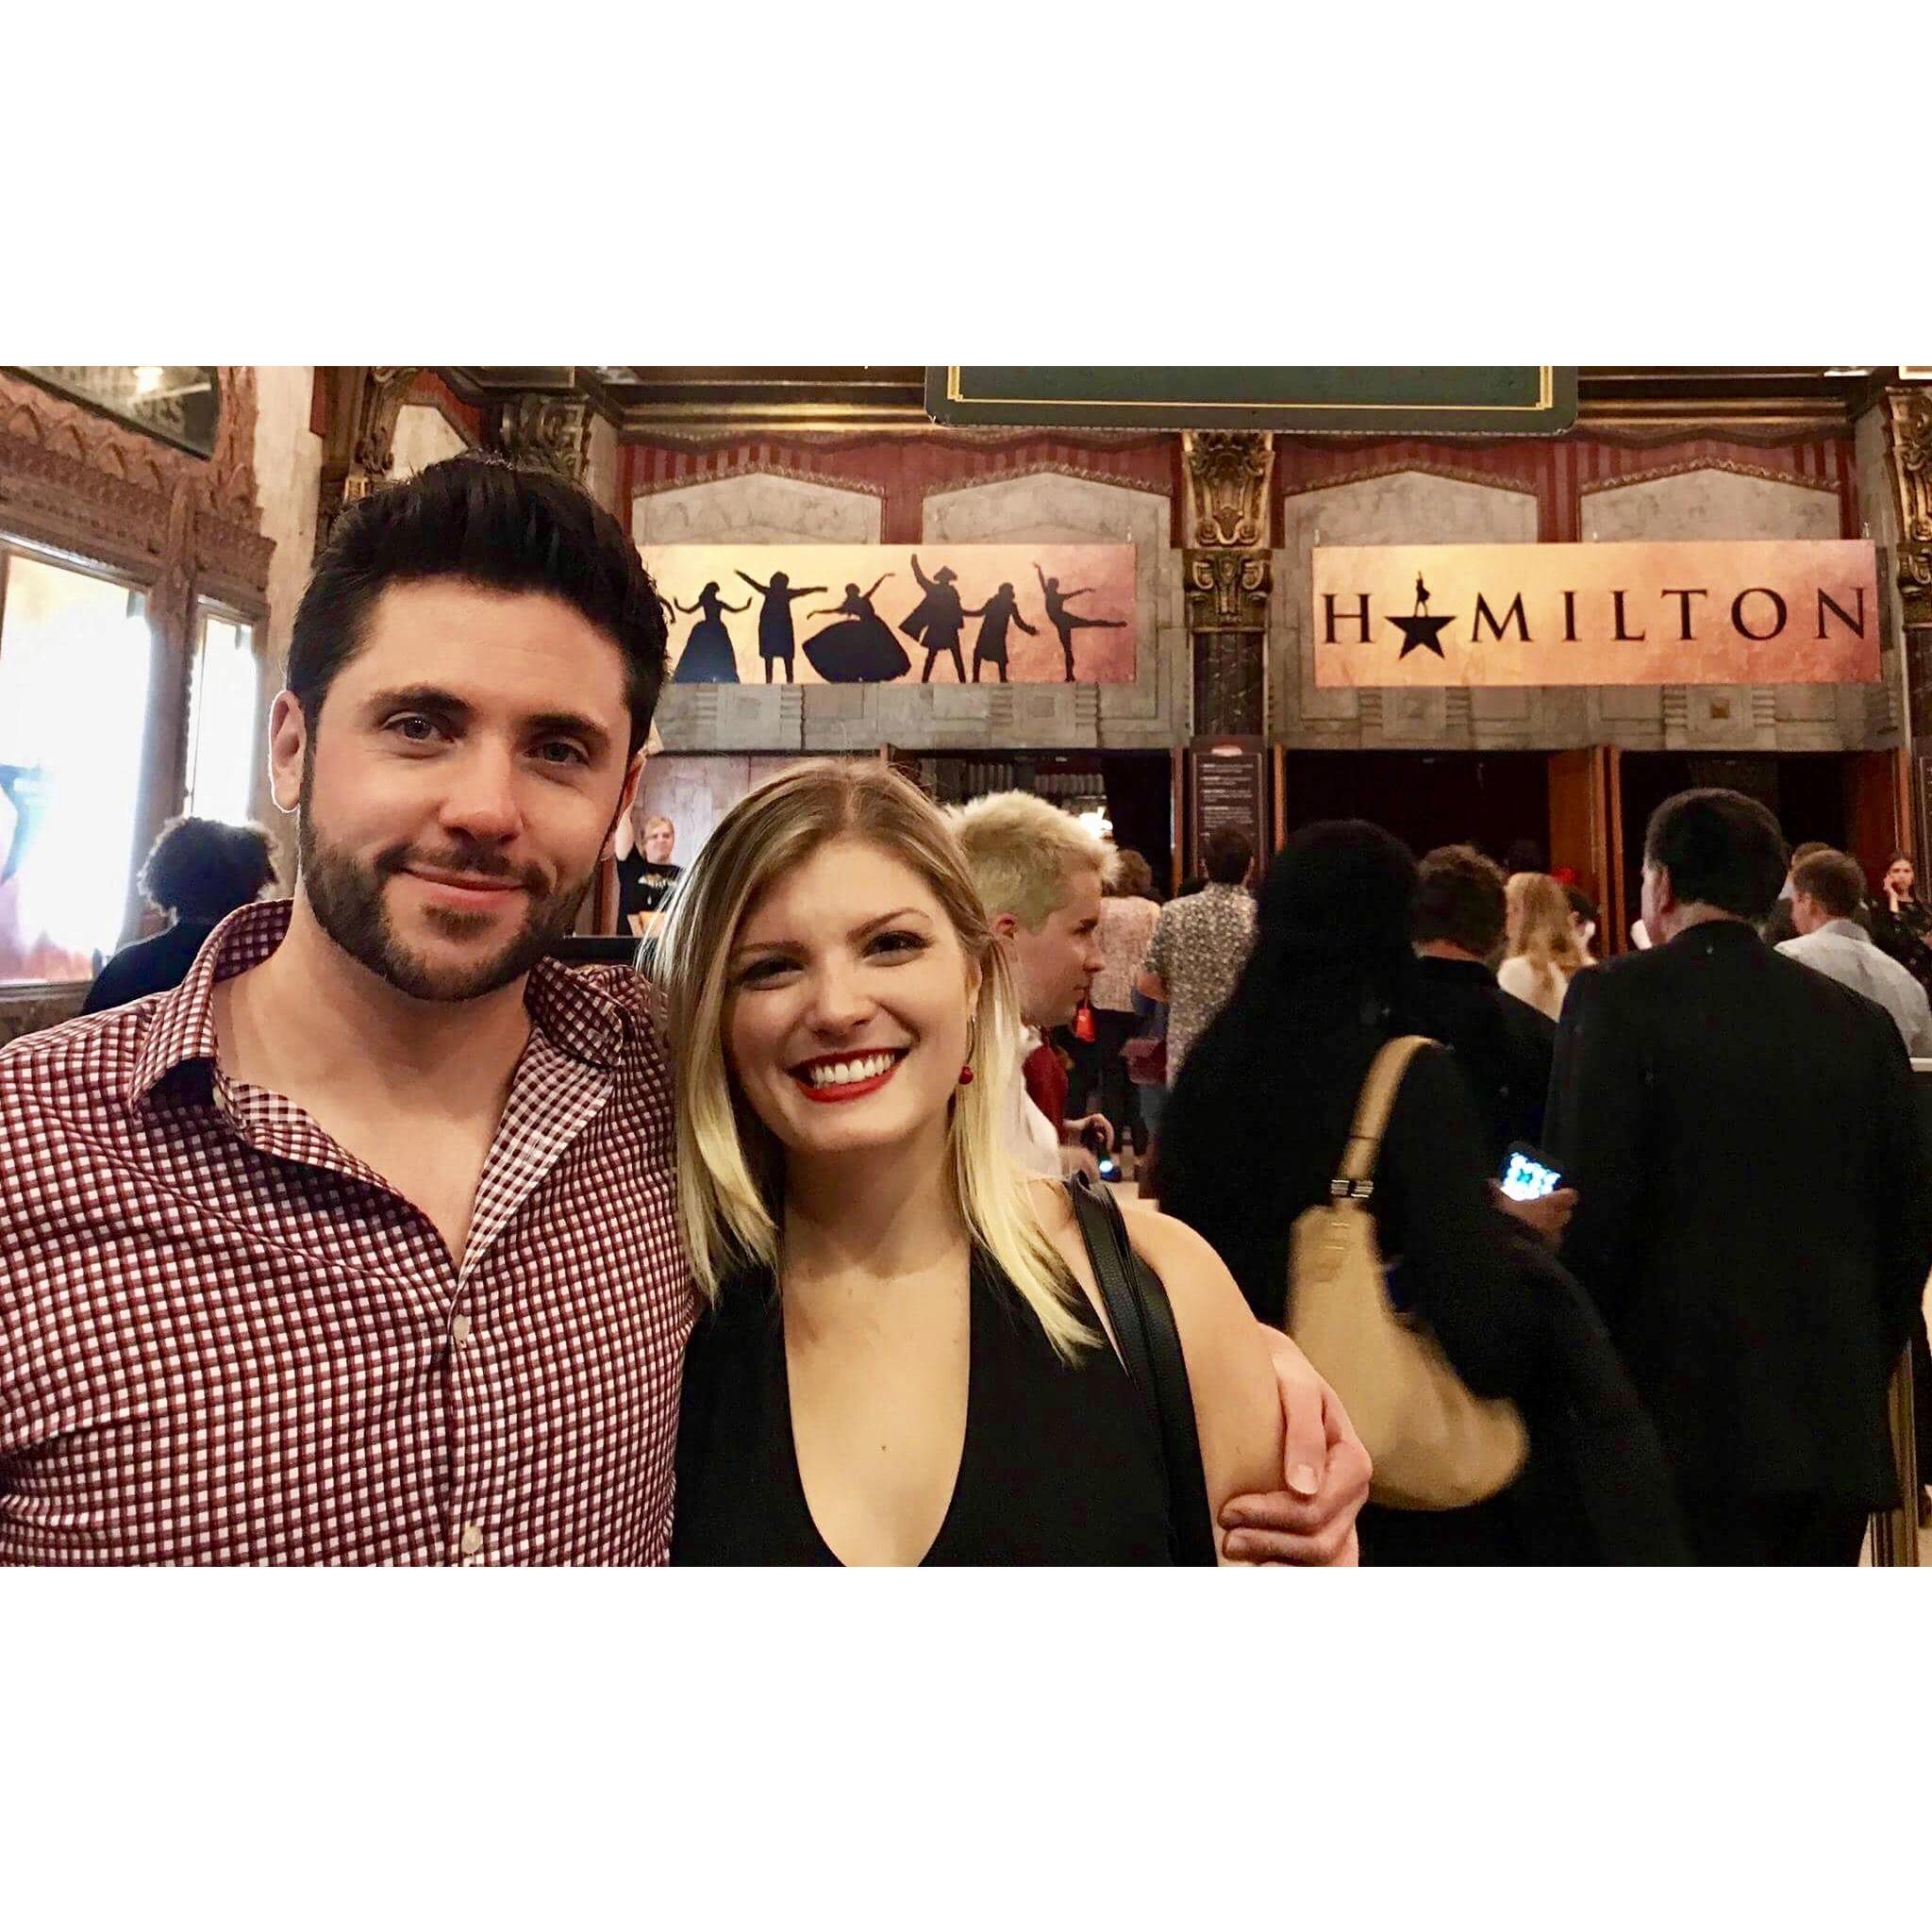 Hamilton at the Pantages Theater in LA
2017